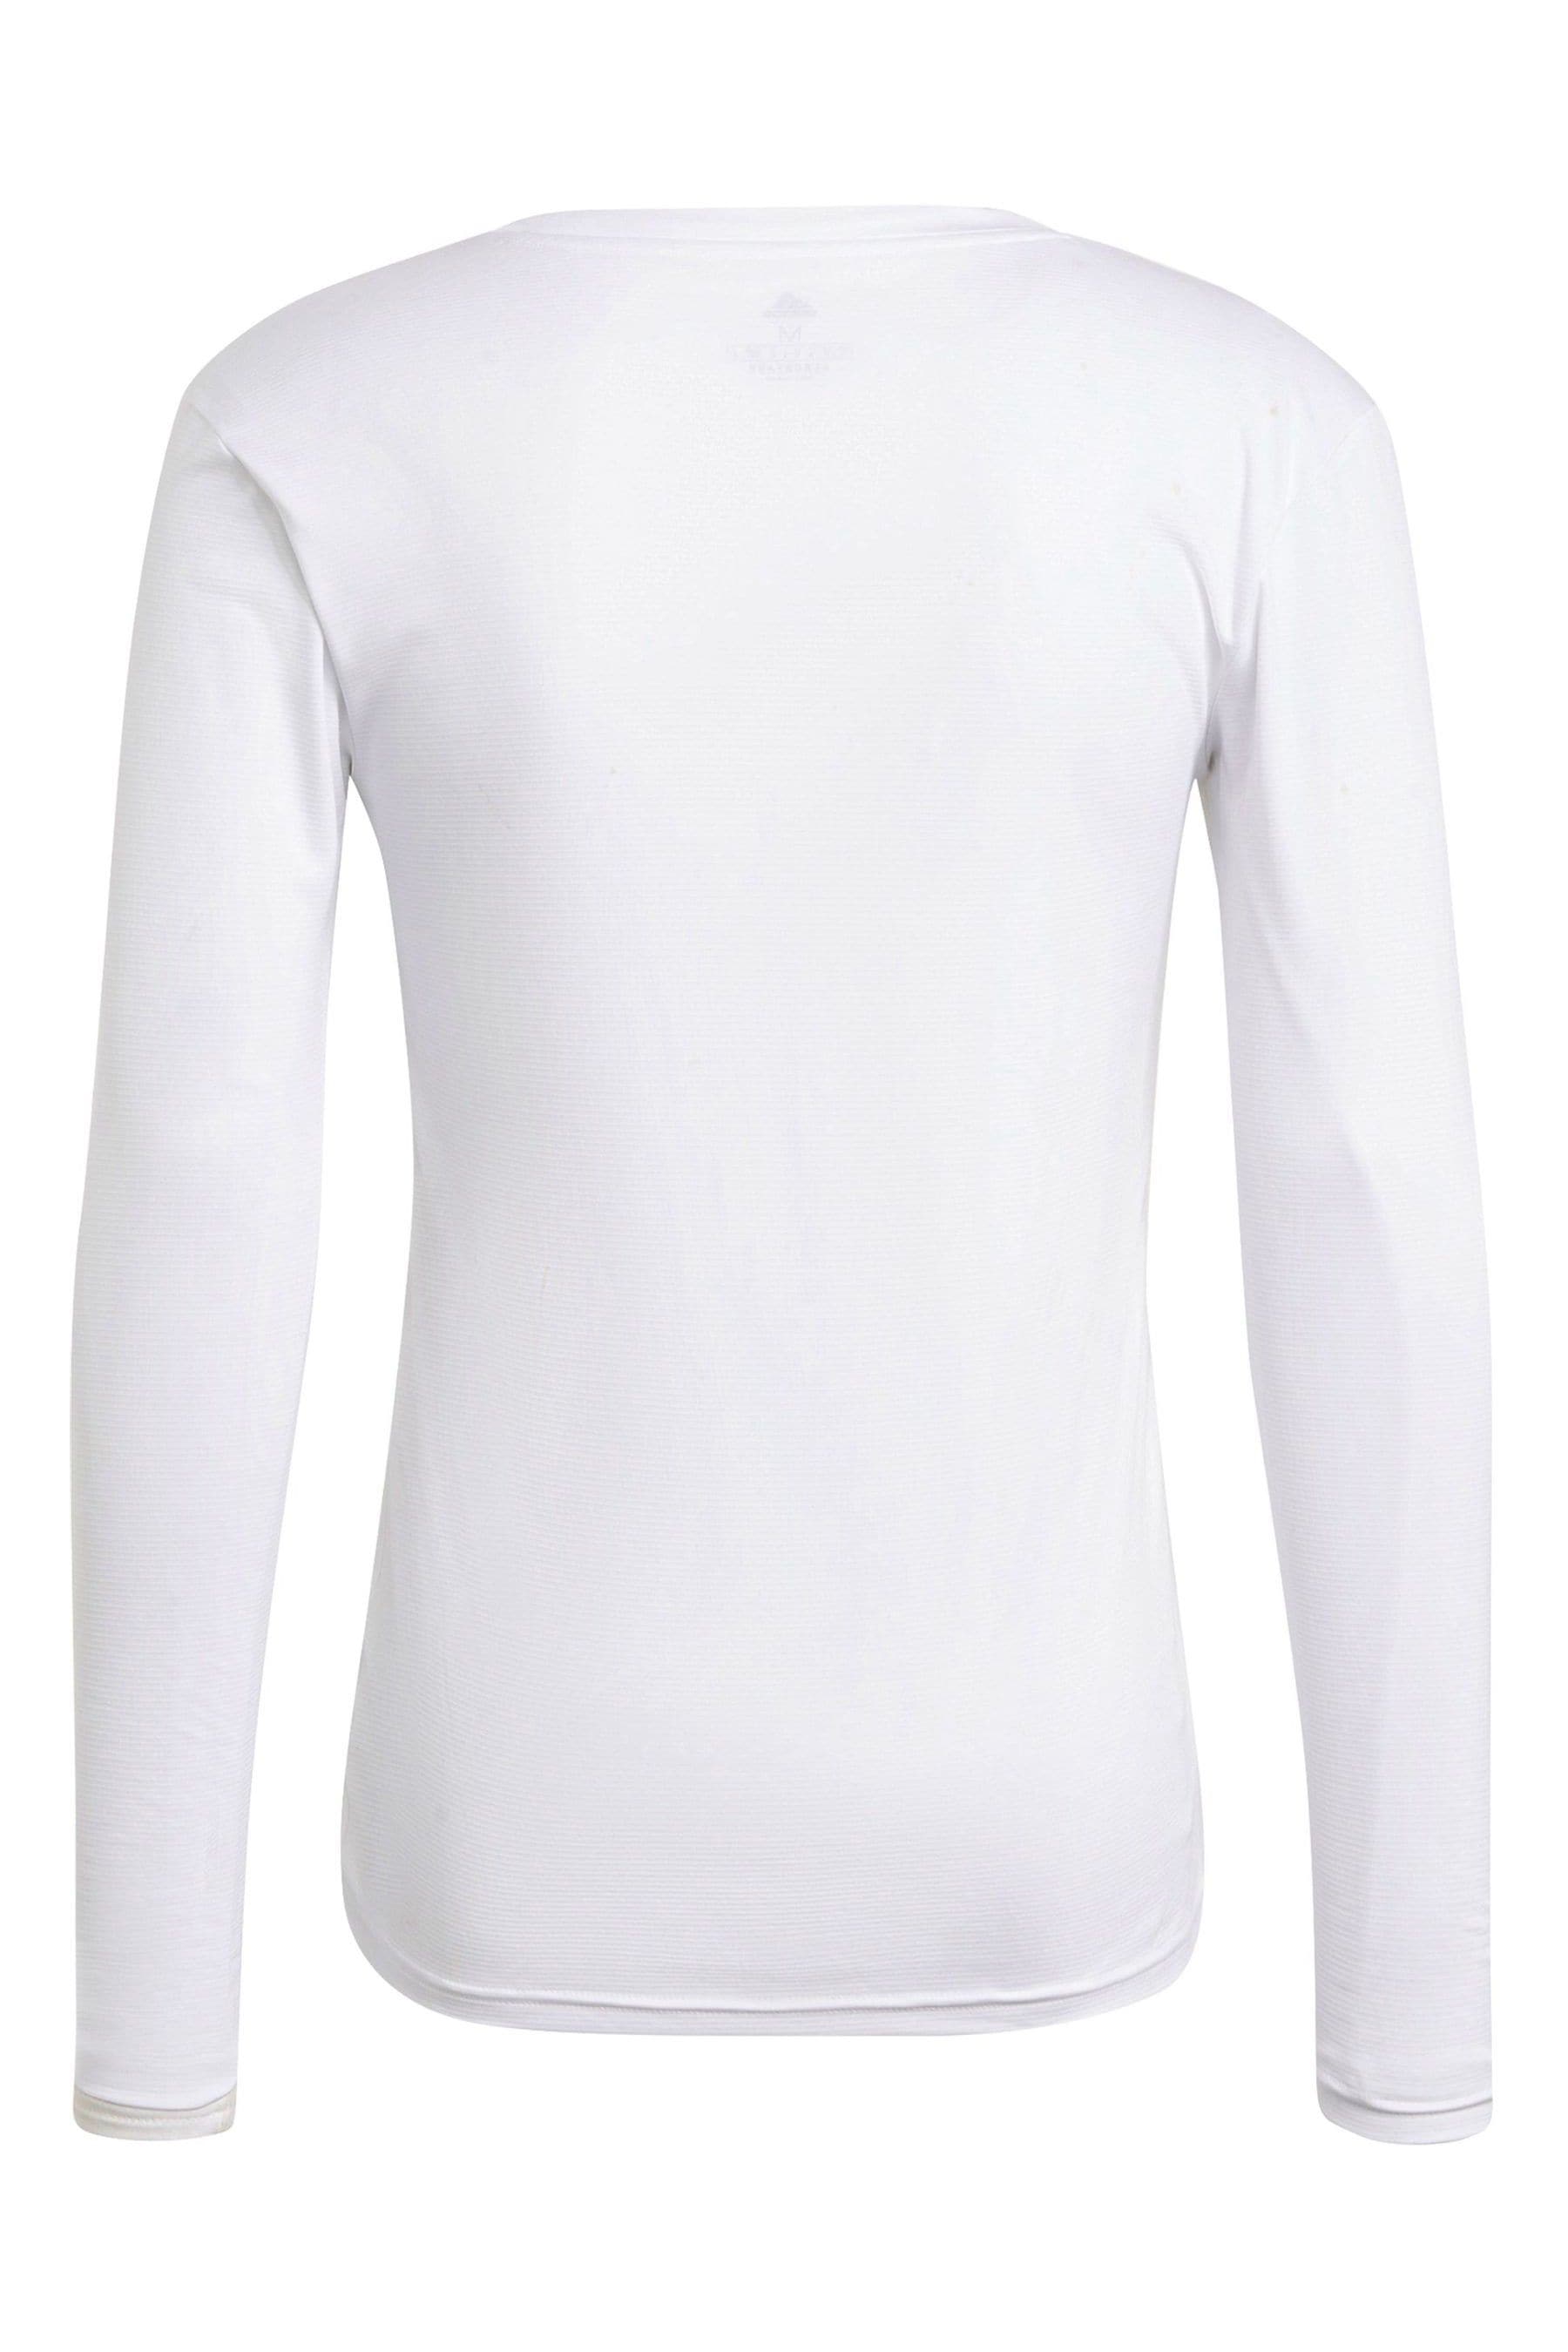 Buy adidas White Performance Football Team Base Layer Tee from the Next ...